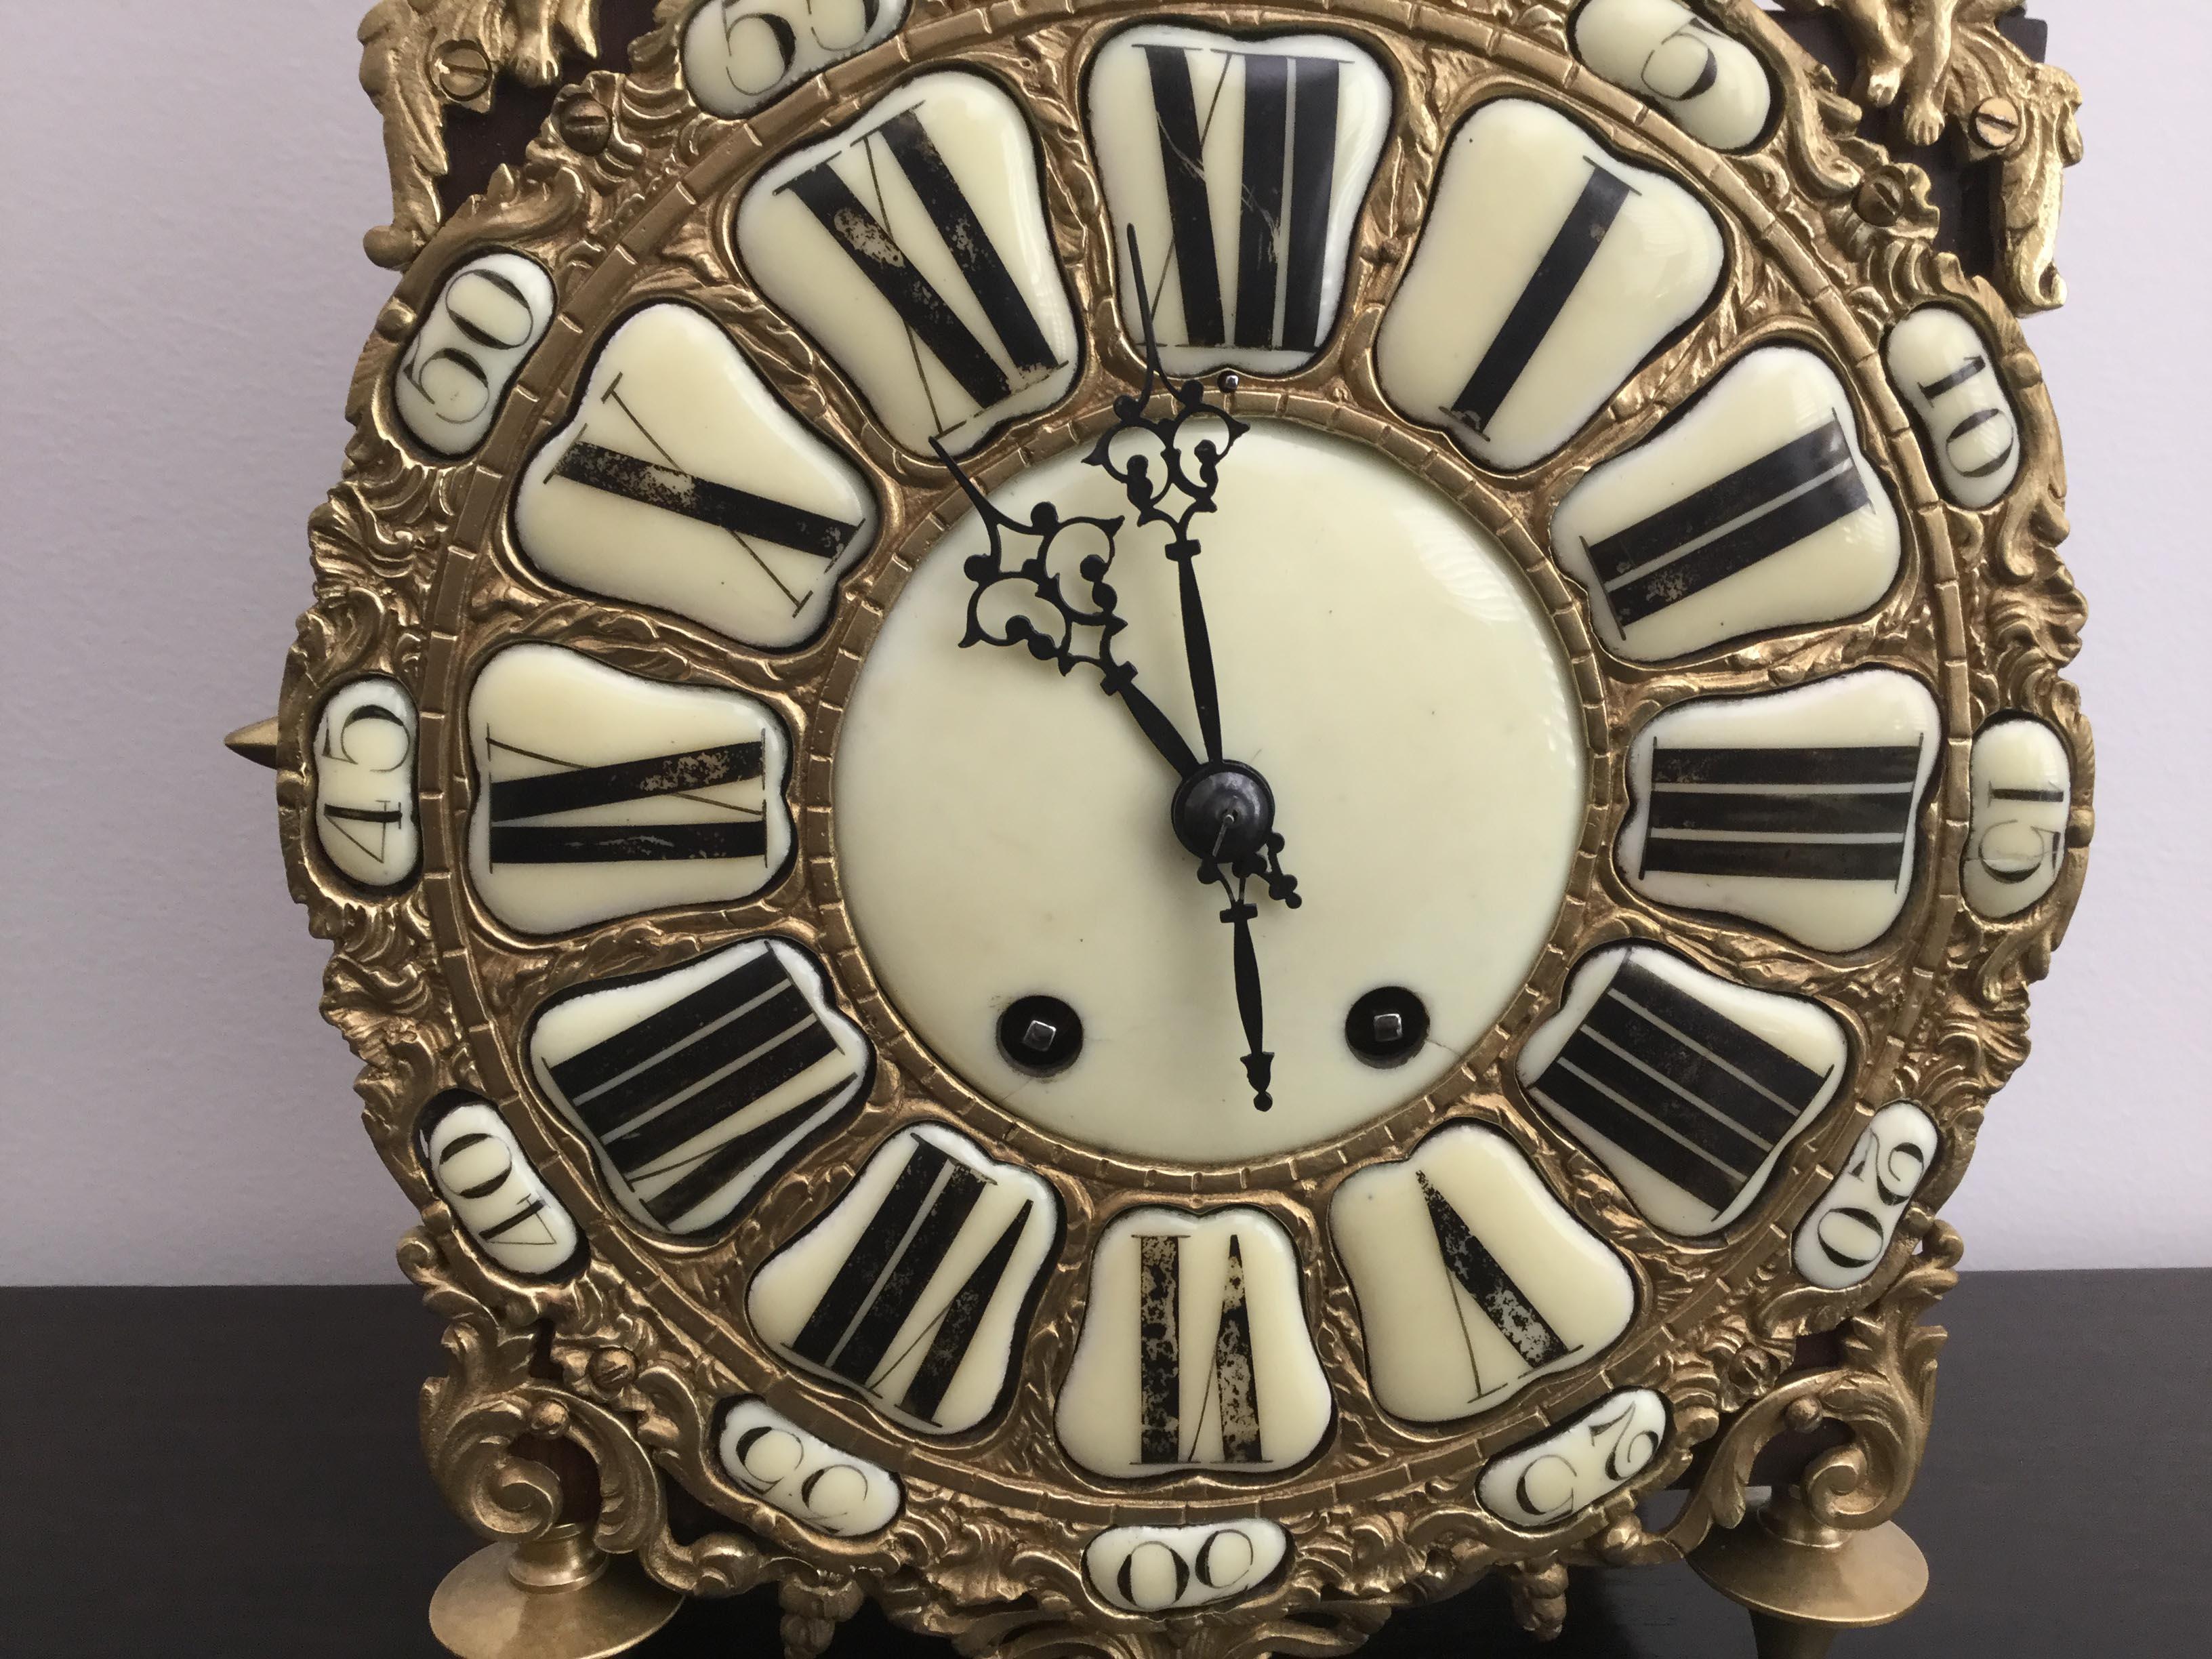 A late 19th century French lantern clock, the dial inset with ceramic numerals showing the hours and minutes. The numerals have some wear which gives the clock a lovely aged appearance.

The brass surround decorated with a female face between four